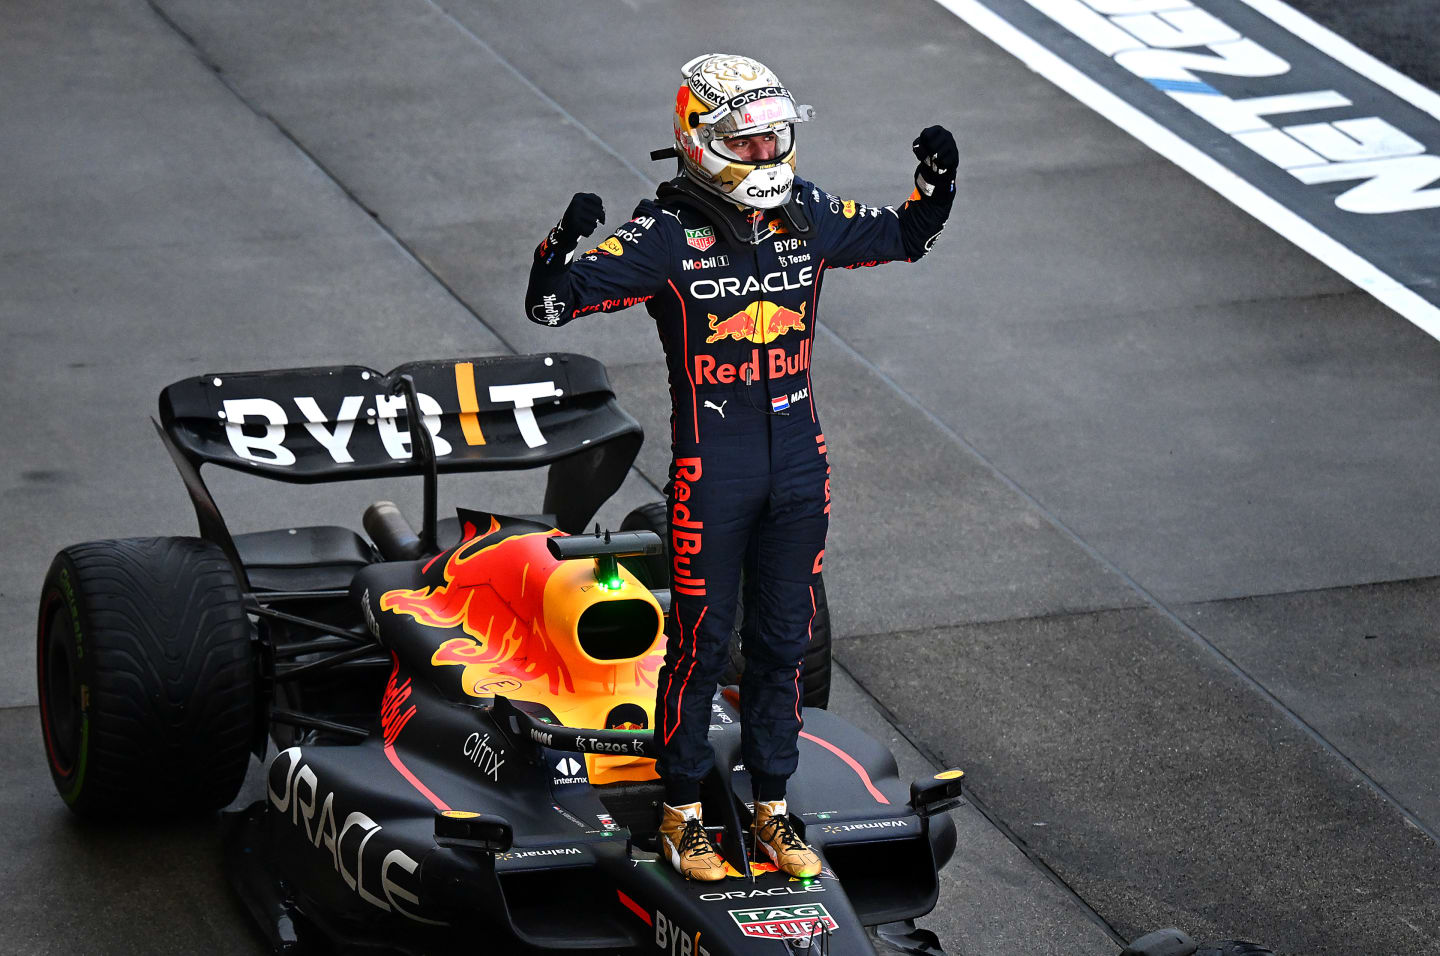 SUZUKA, JAPAN - OCTOBER 09: Race winner and 2022 F1 World Drivers Champion Max Verstappen of Netherlands and Oracle Red Bull Racing celebrates in parc ferme during the F1 Grand Prix of Japan at Suzuka International Racing Course on October 09, 2022 in Suzuka, Japan. (Photo by Clive Mason/Getty Images)